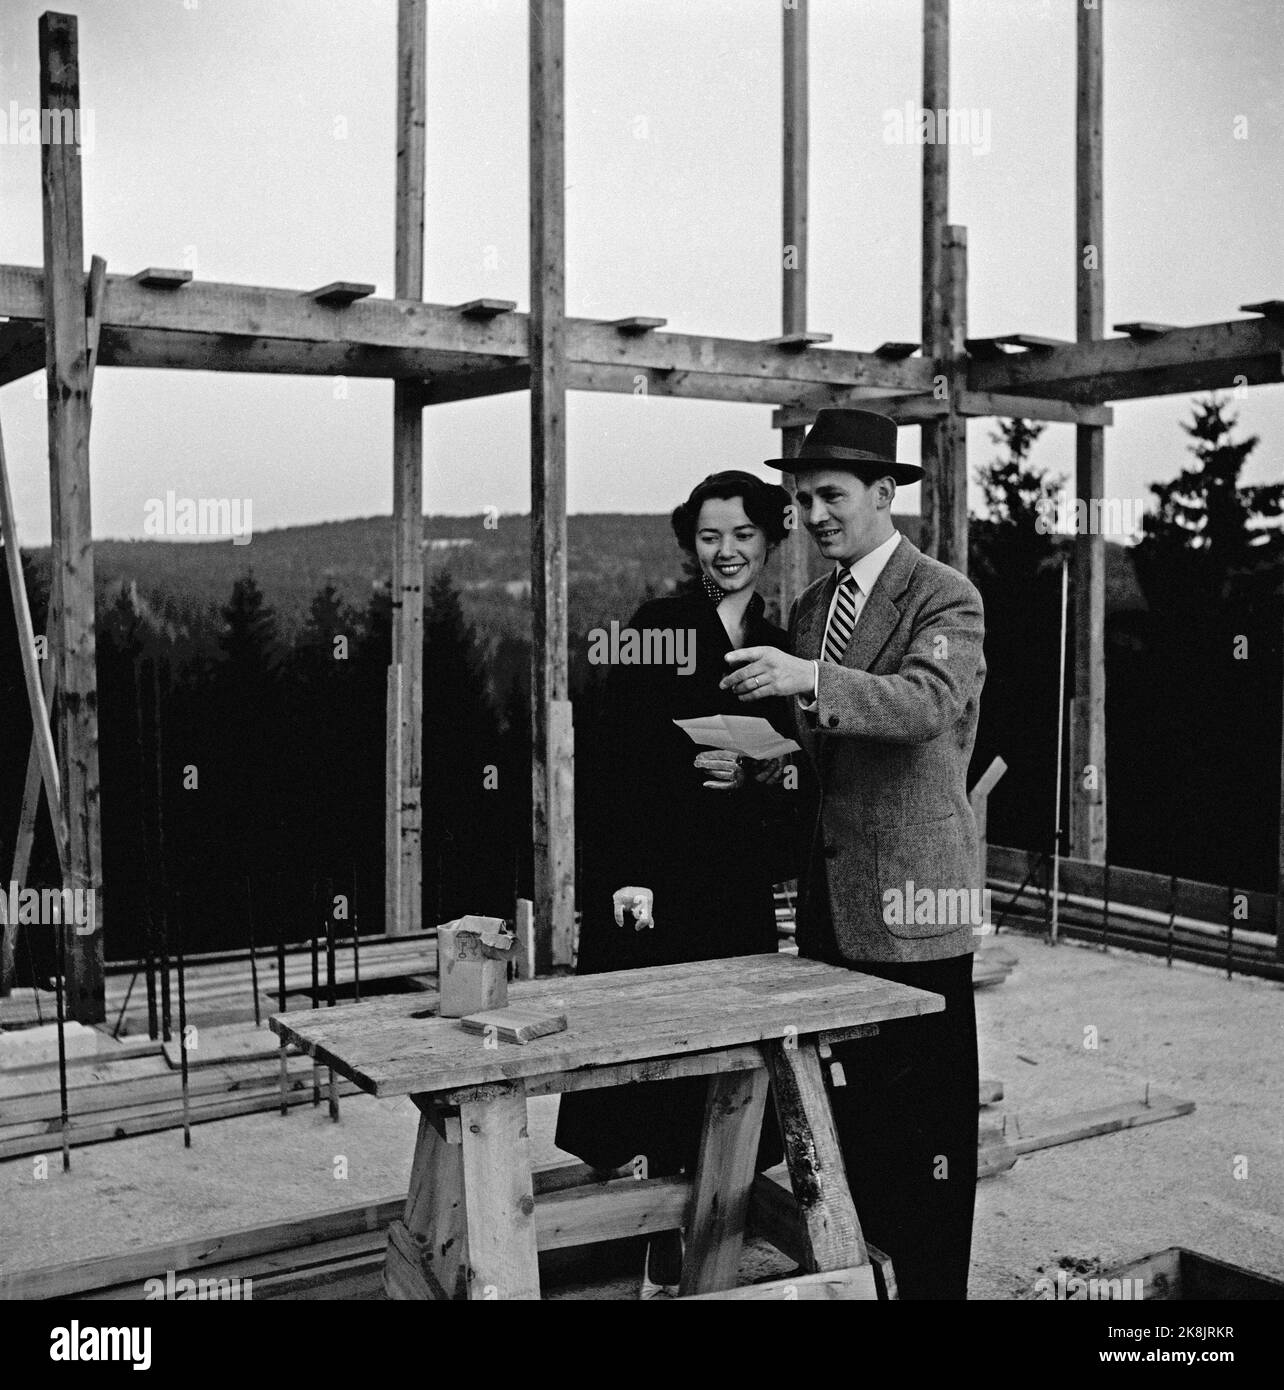 Oslo 19550601. 35000 OBOS members are on a waiting list for their own apartment, although approx. 11000 have been able to buy an apartment in the years 1945-1955. Here young and smiling married couples at a construction site. Photo: Gerald Pagano / Current / NTB Stock Photo